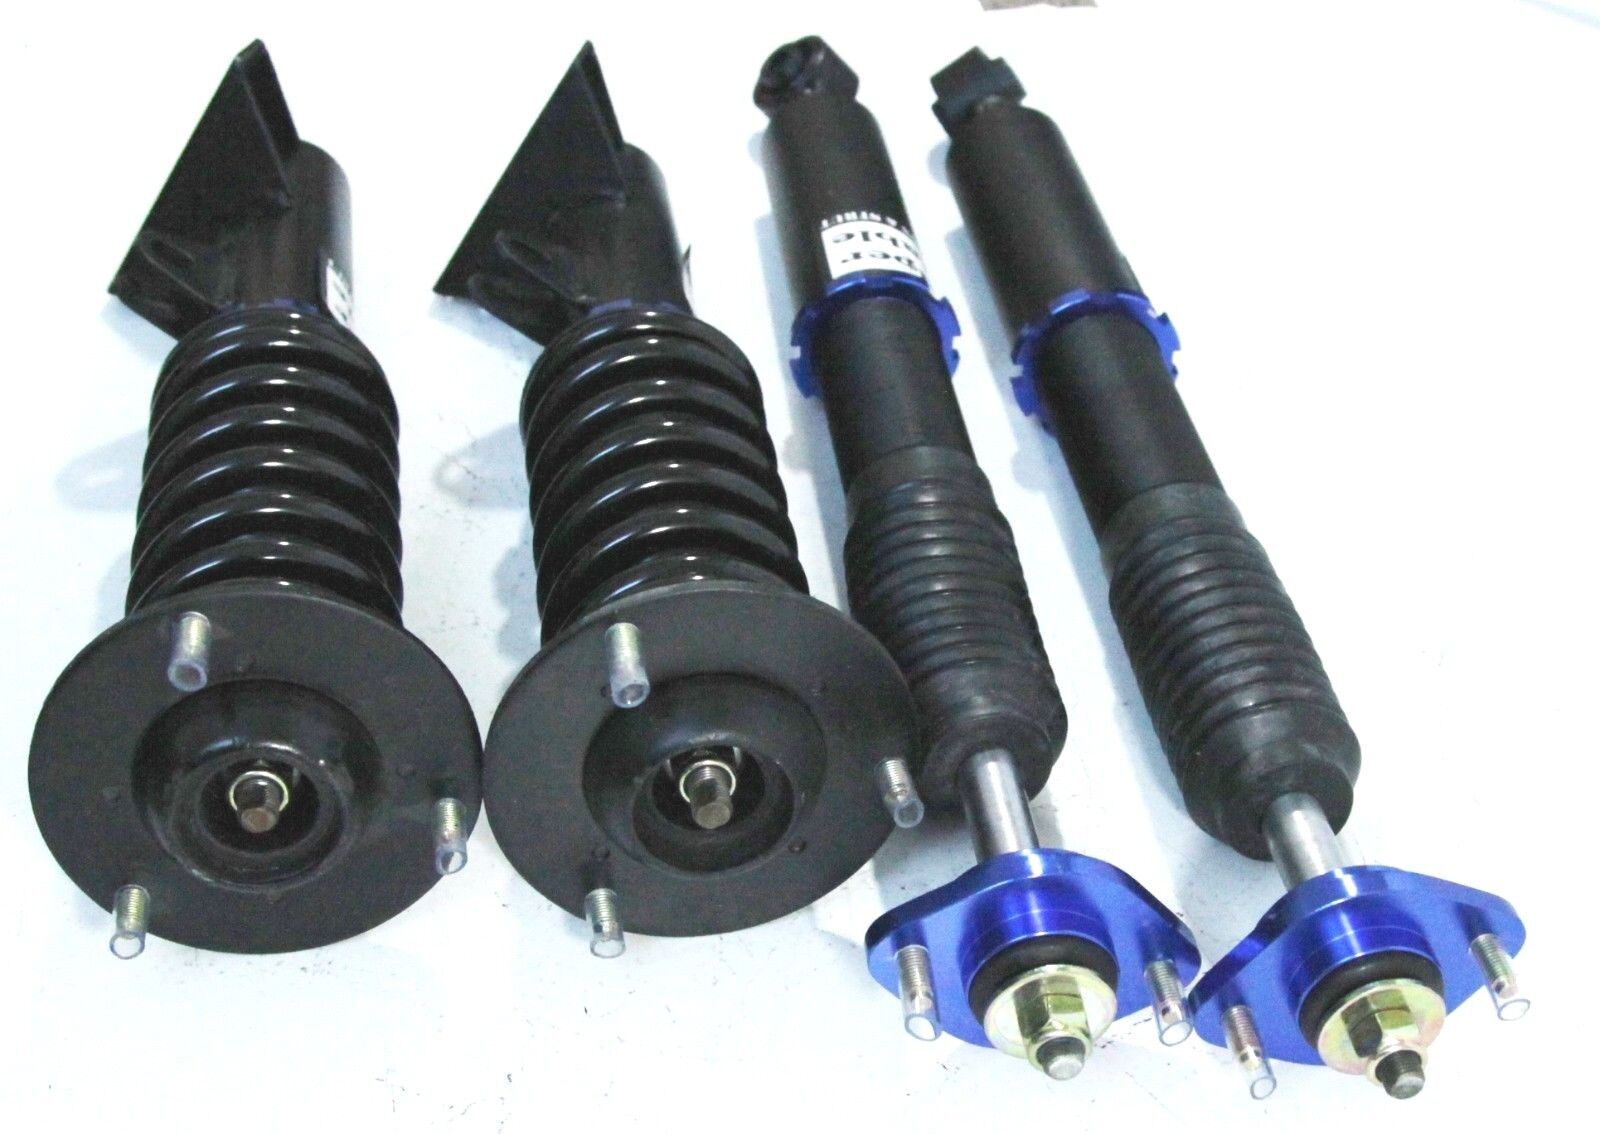 Complete BLUE SUSPENSION COILOVERS SET FOR 92-98 BMW 3-SERIES E36 325 M3